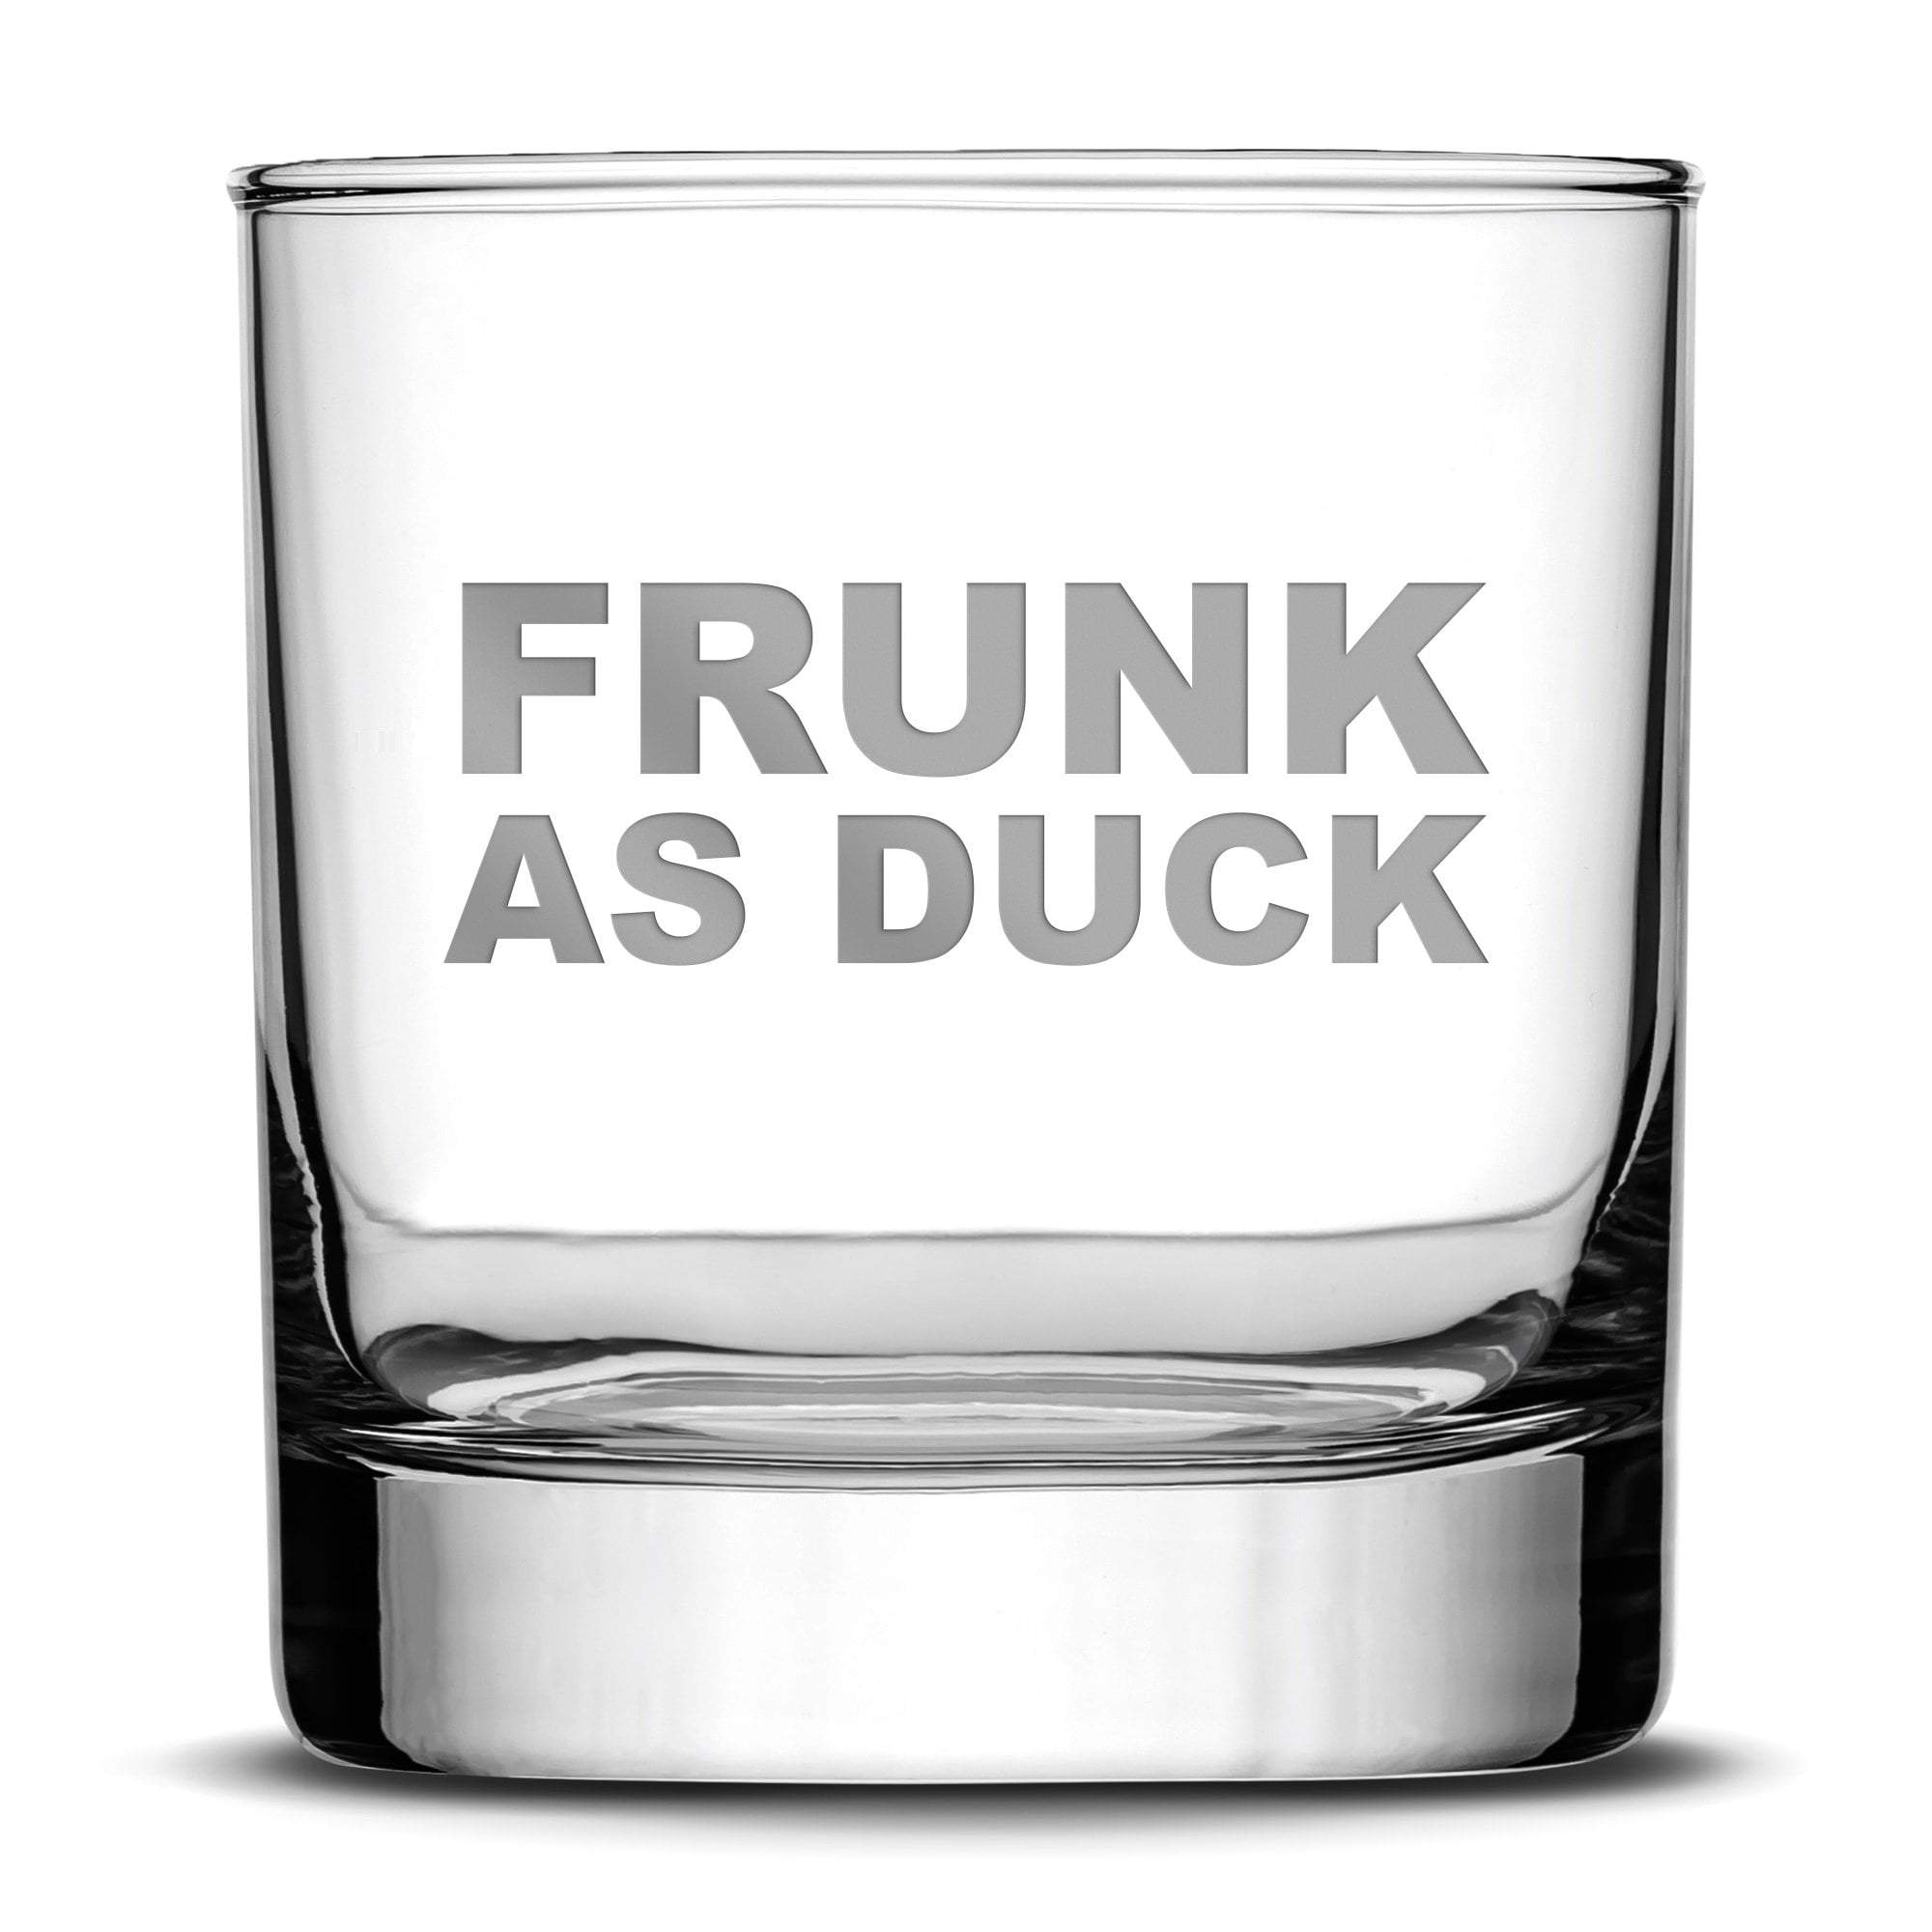 Premium Frunk As Duck Whiskey Glass, Hand Etched 10oz Rocks Glass by Integrity Bottles